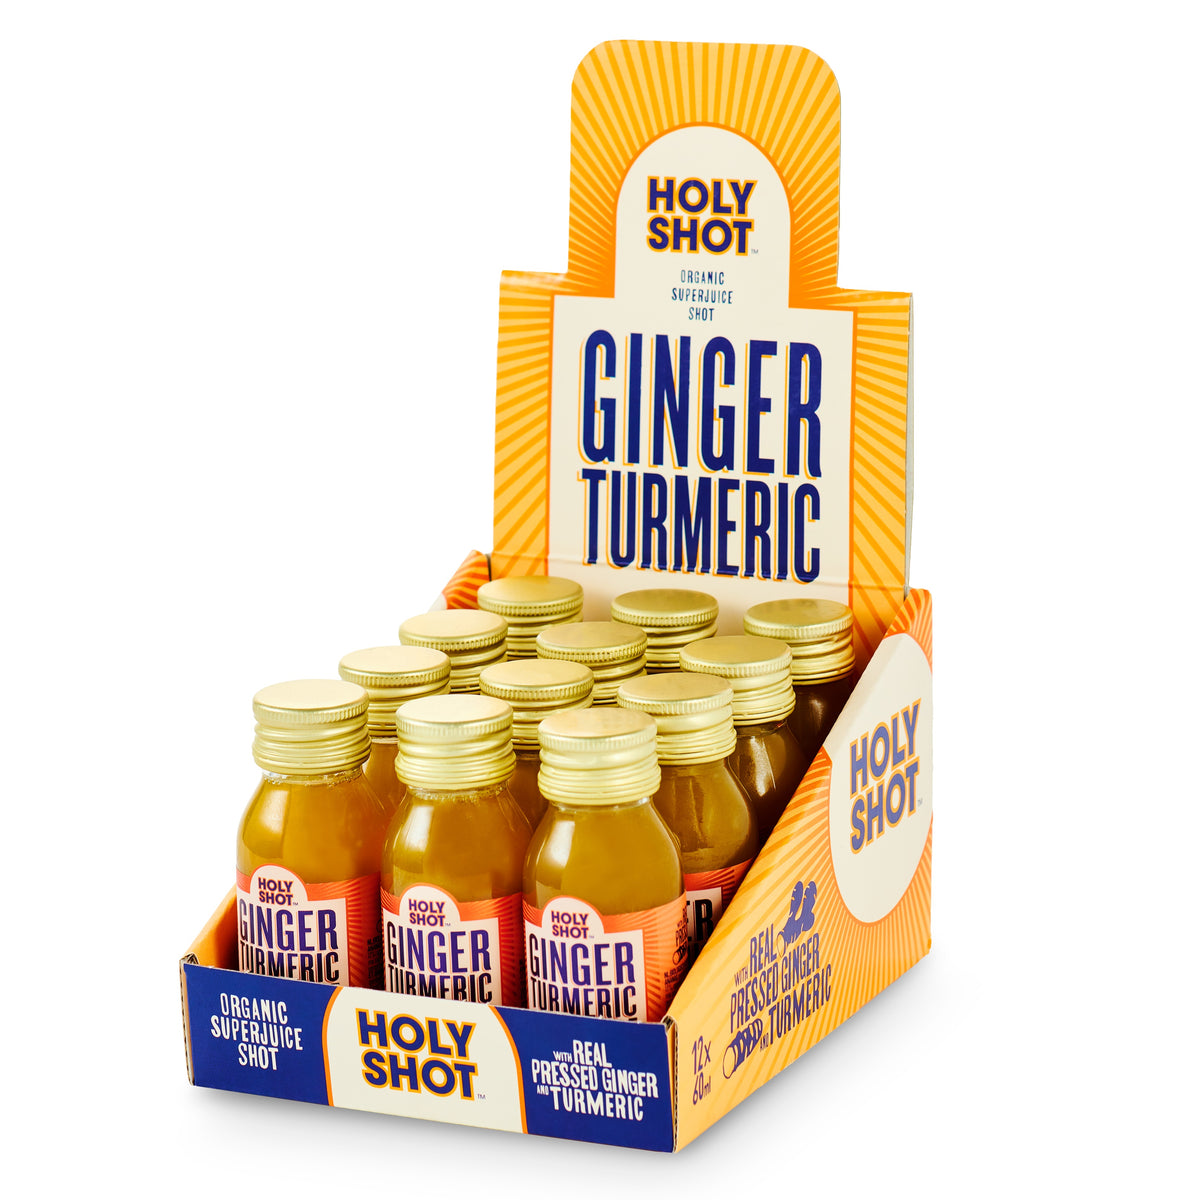 &lt;tc&gt;12x60ml HOLY SHOT with Ginger, Turmeric and Pineapple [ORGANIC]&lt;/tc&gt;